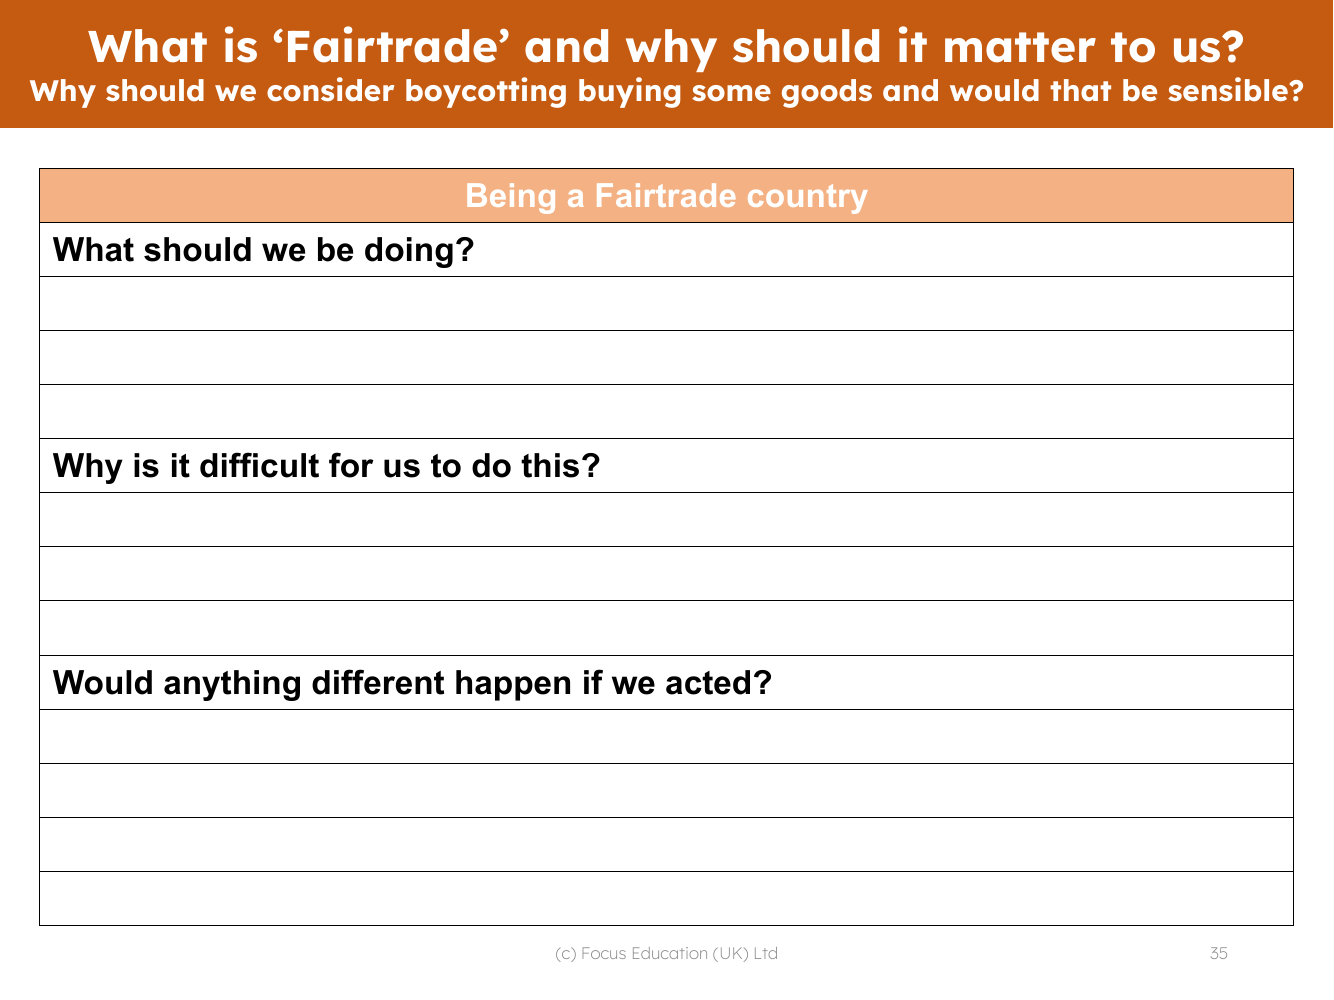 Being a Fairtrade country - Worksheet